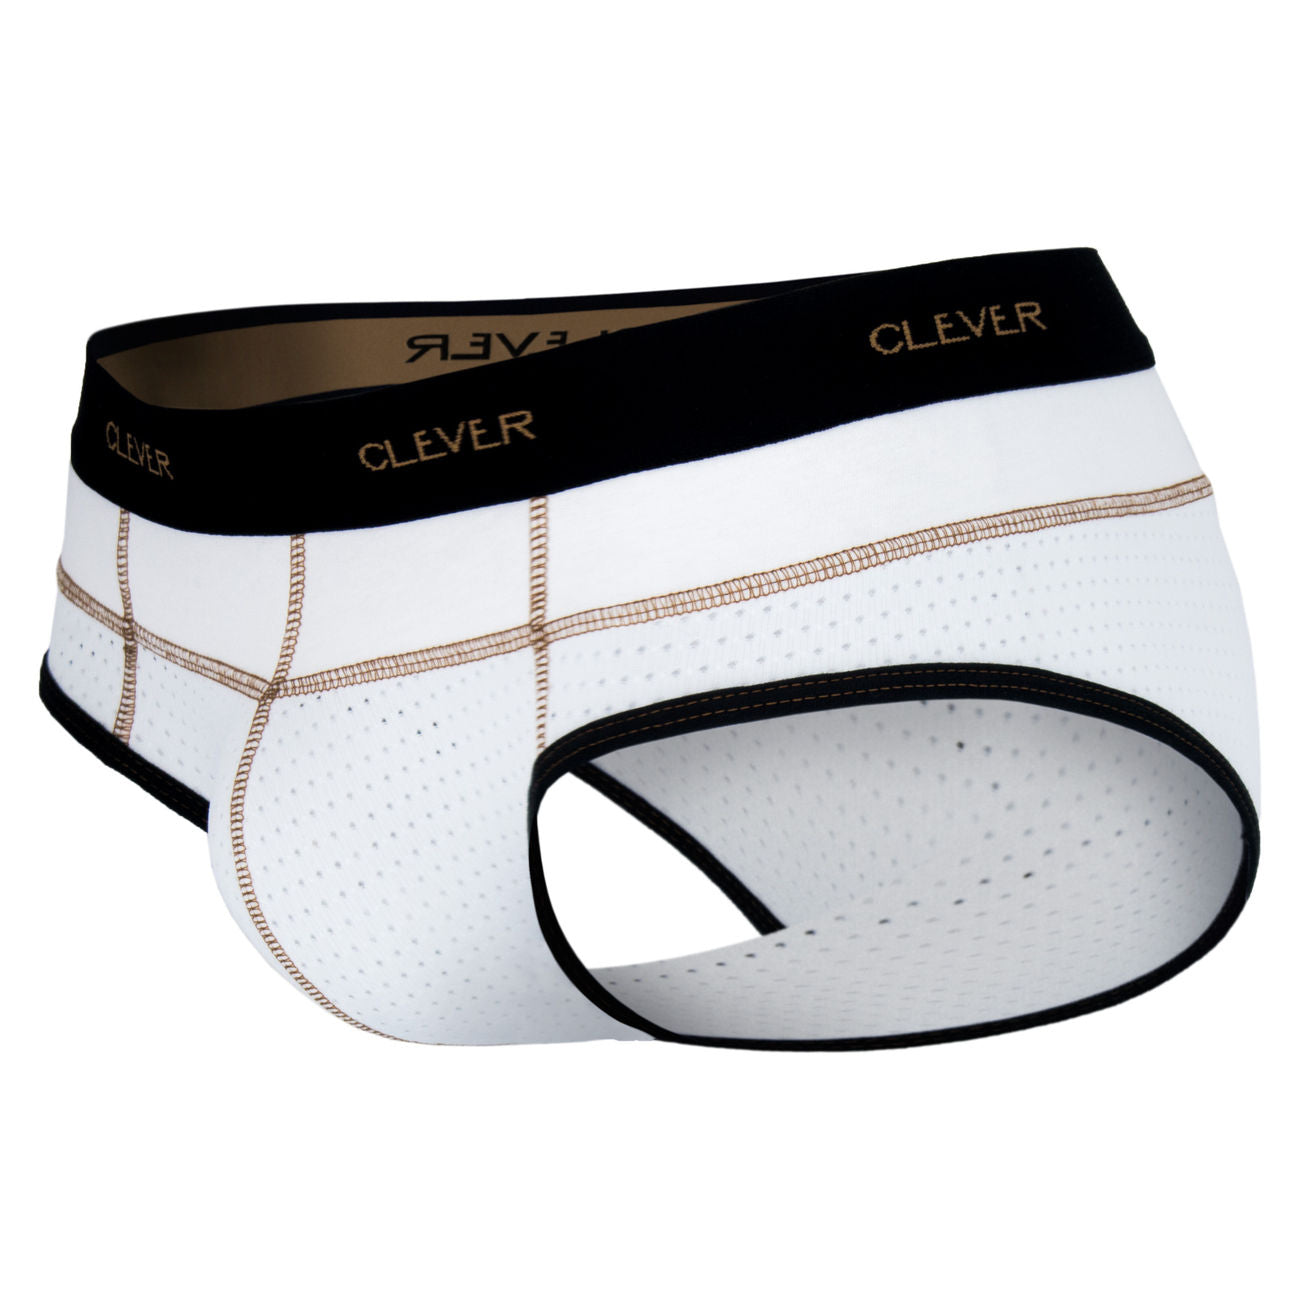 Clever 5317 Sweetness Piping Briefs White